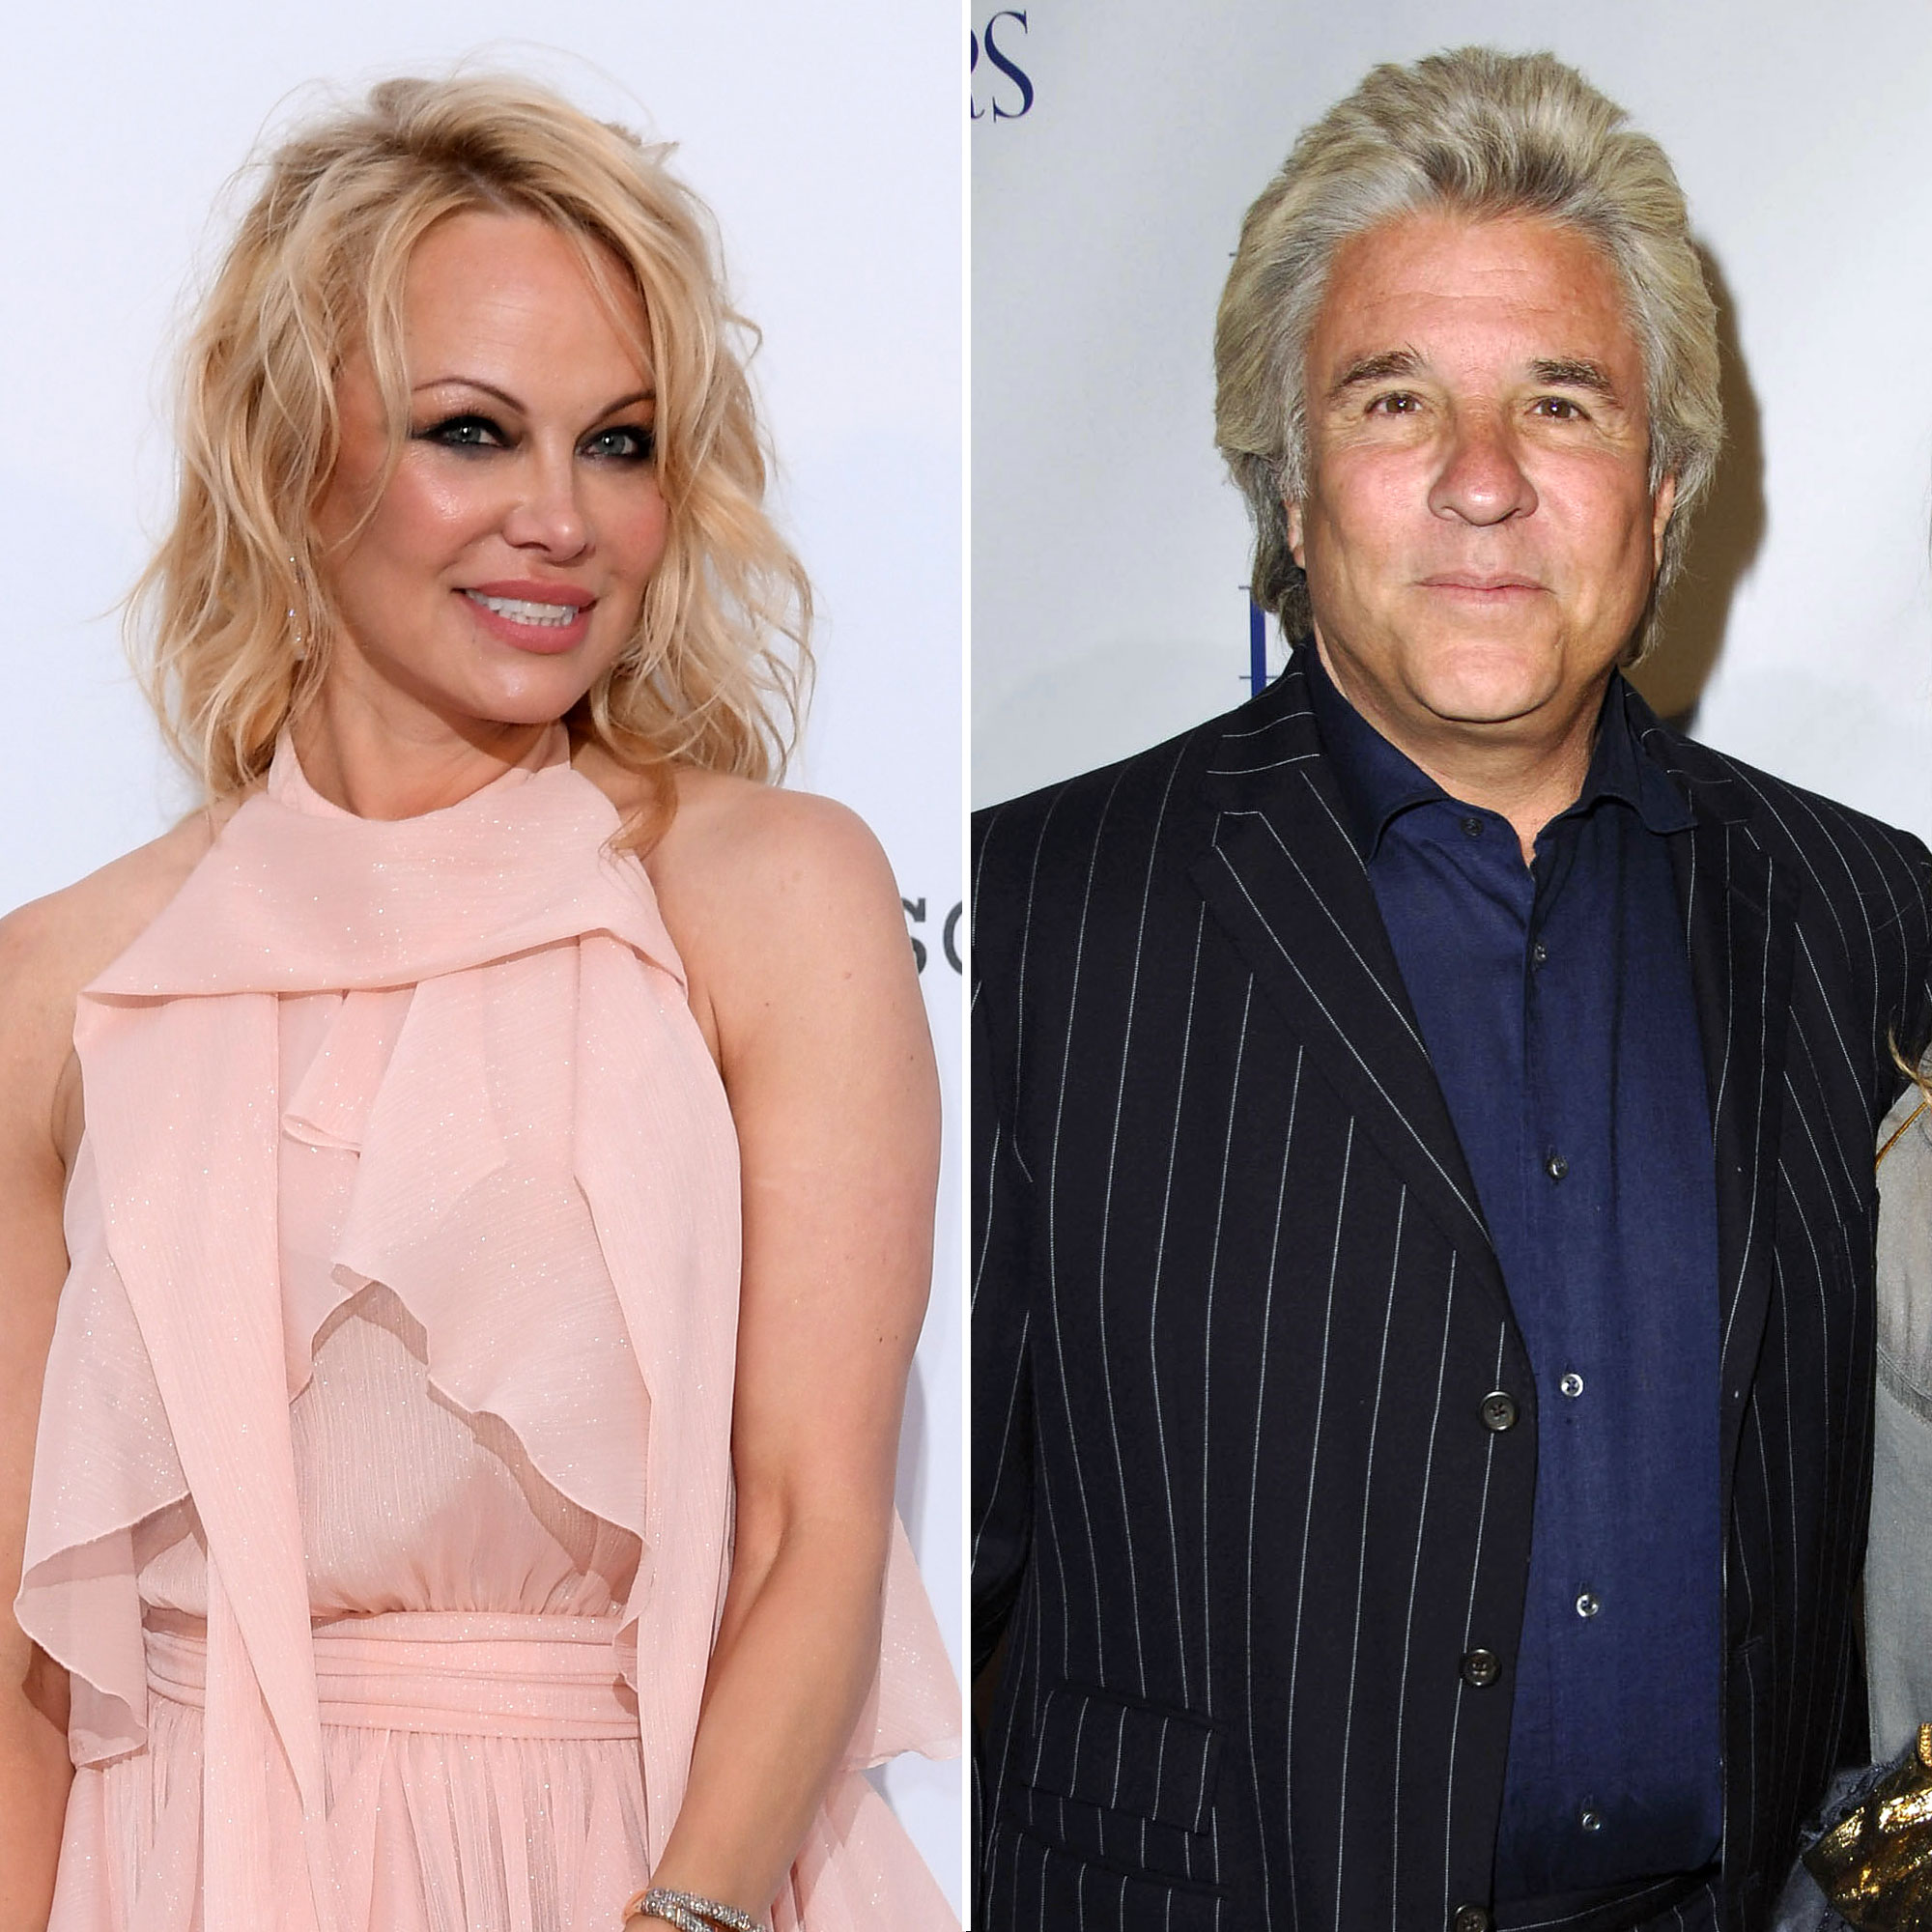 Pamela Anderson's ex-husband Jon Peters is engaged to another